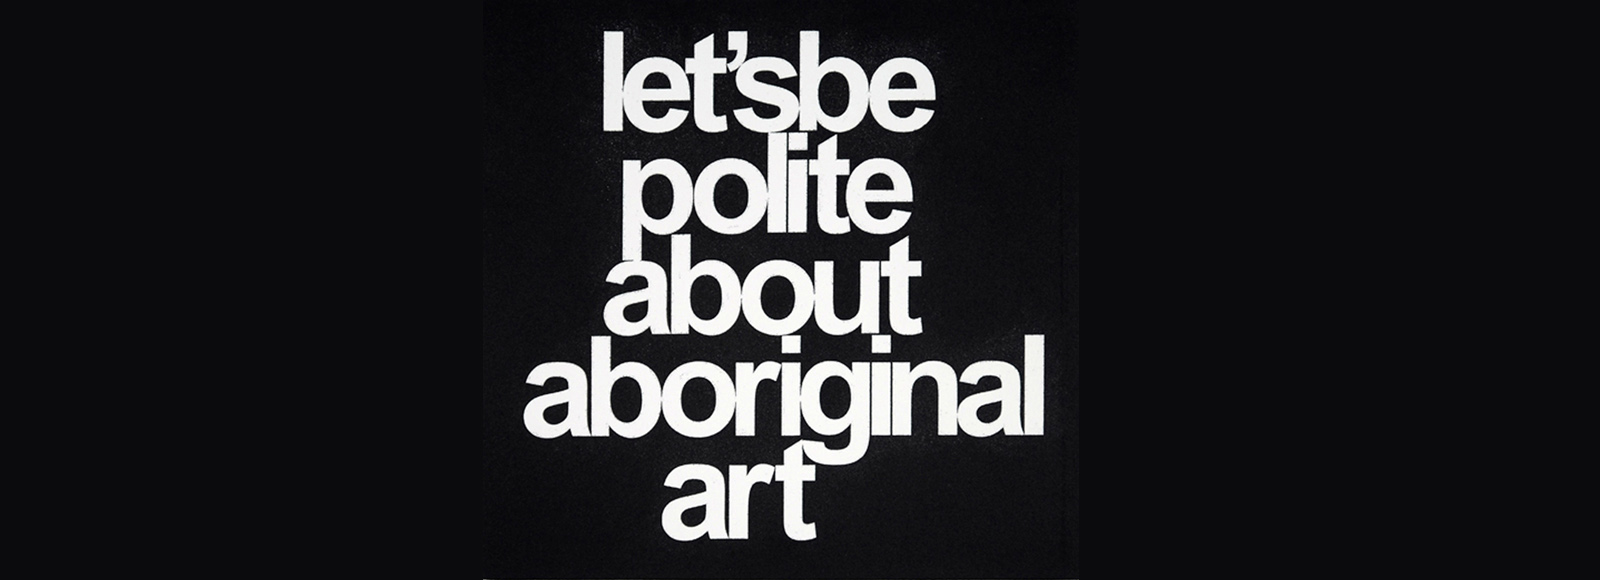 Vernon Ah Kee, Let's Be Polite About Aboriginal Art, 2012 Etching and aquatint printed relief